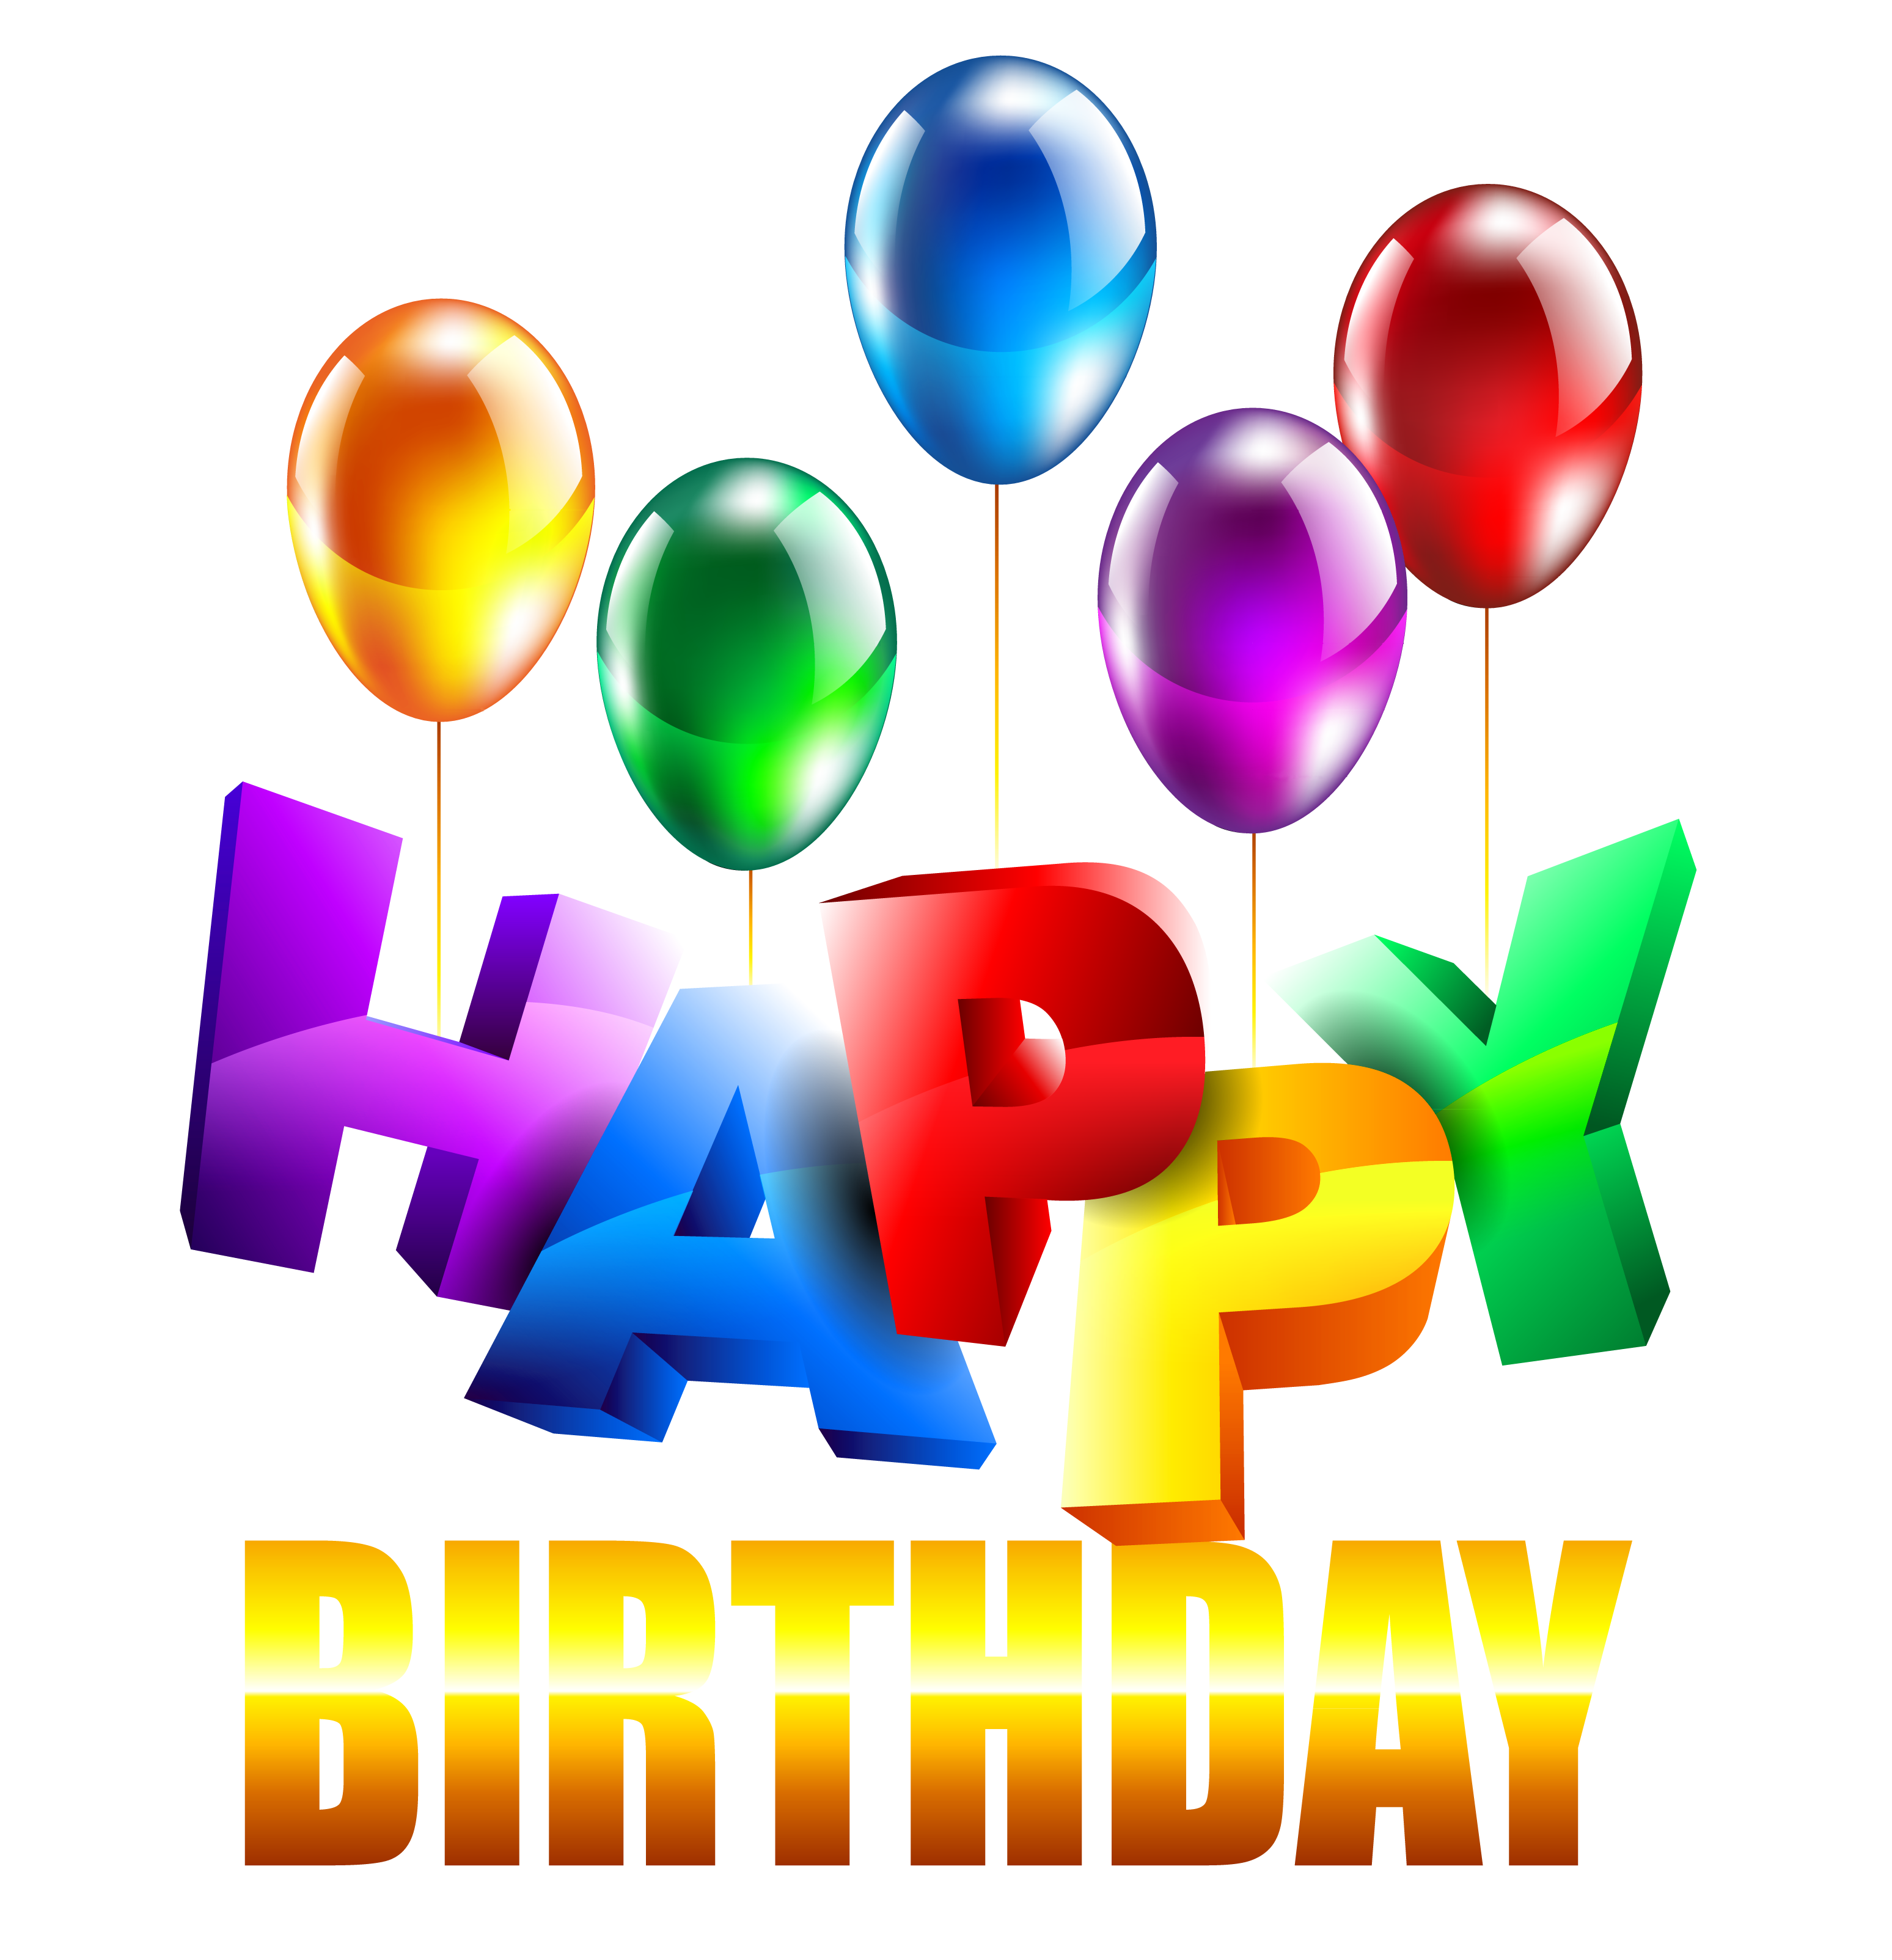 Google png image. Happy birthday images free